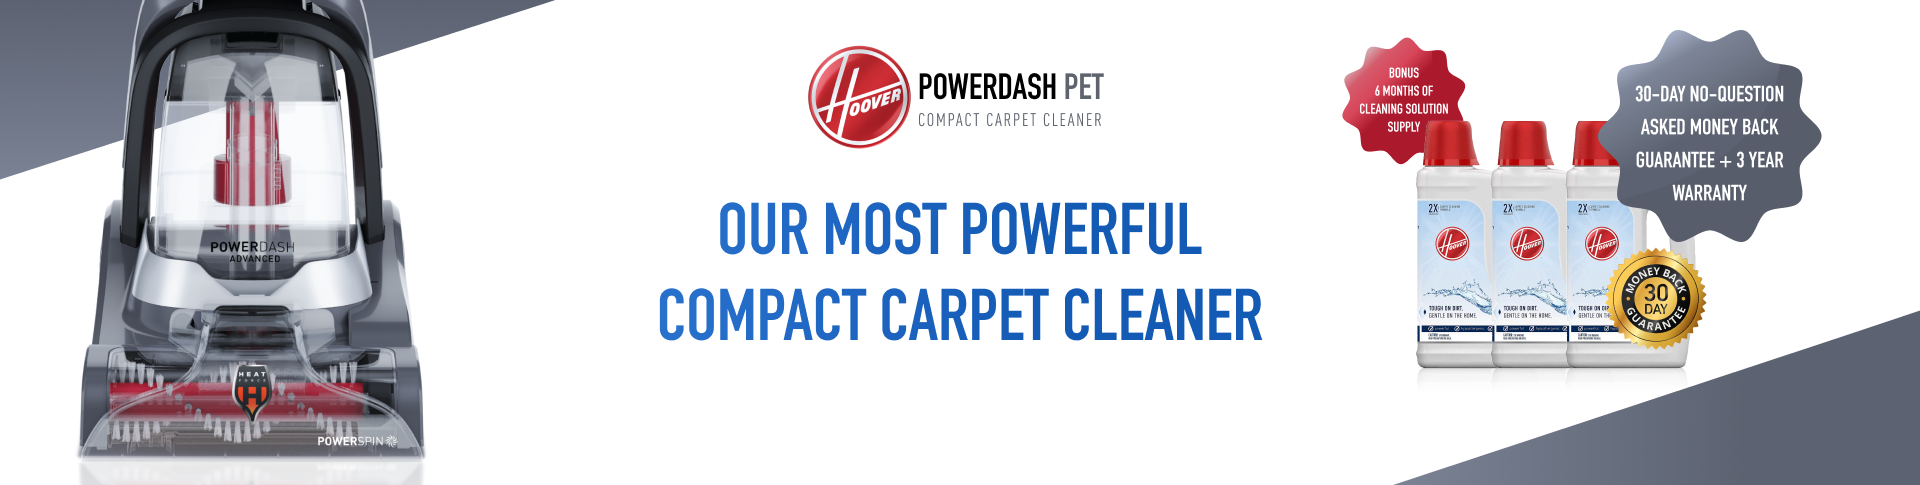 Hoover PowerDash <br/>Compact Carpet Washer